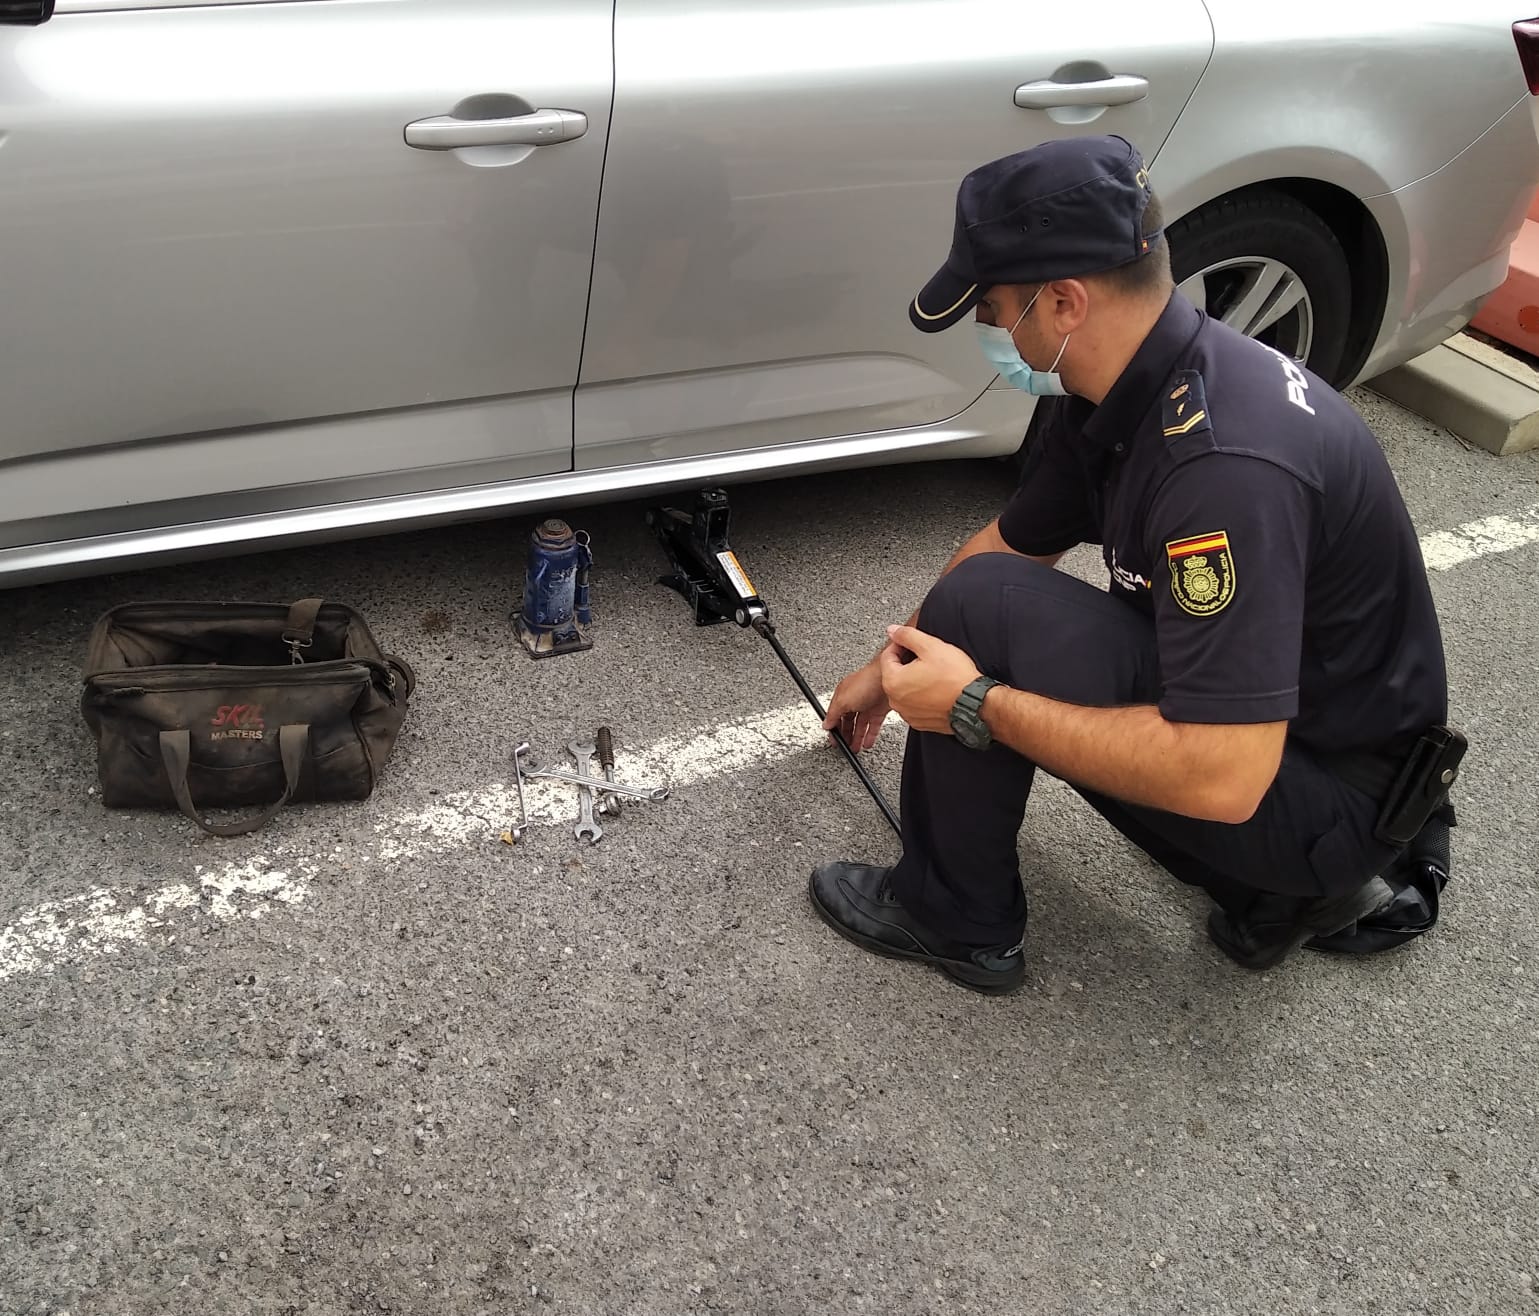 Crooks Steal Valuable Catalytic Converters From Cars Parked In A Costa Blanca City In Spain